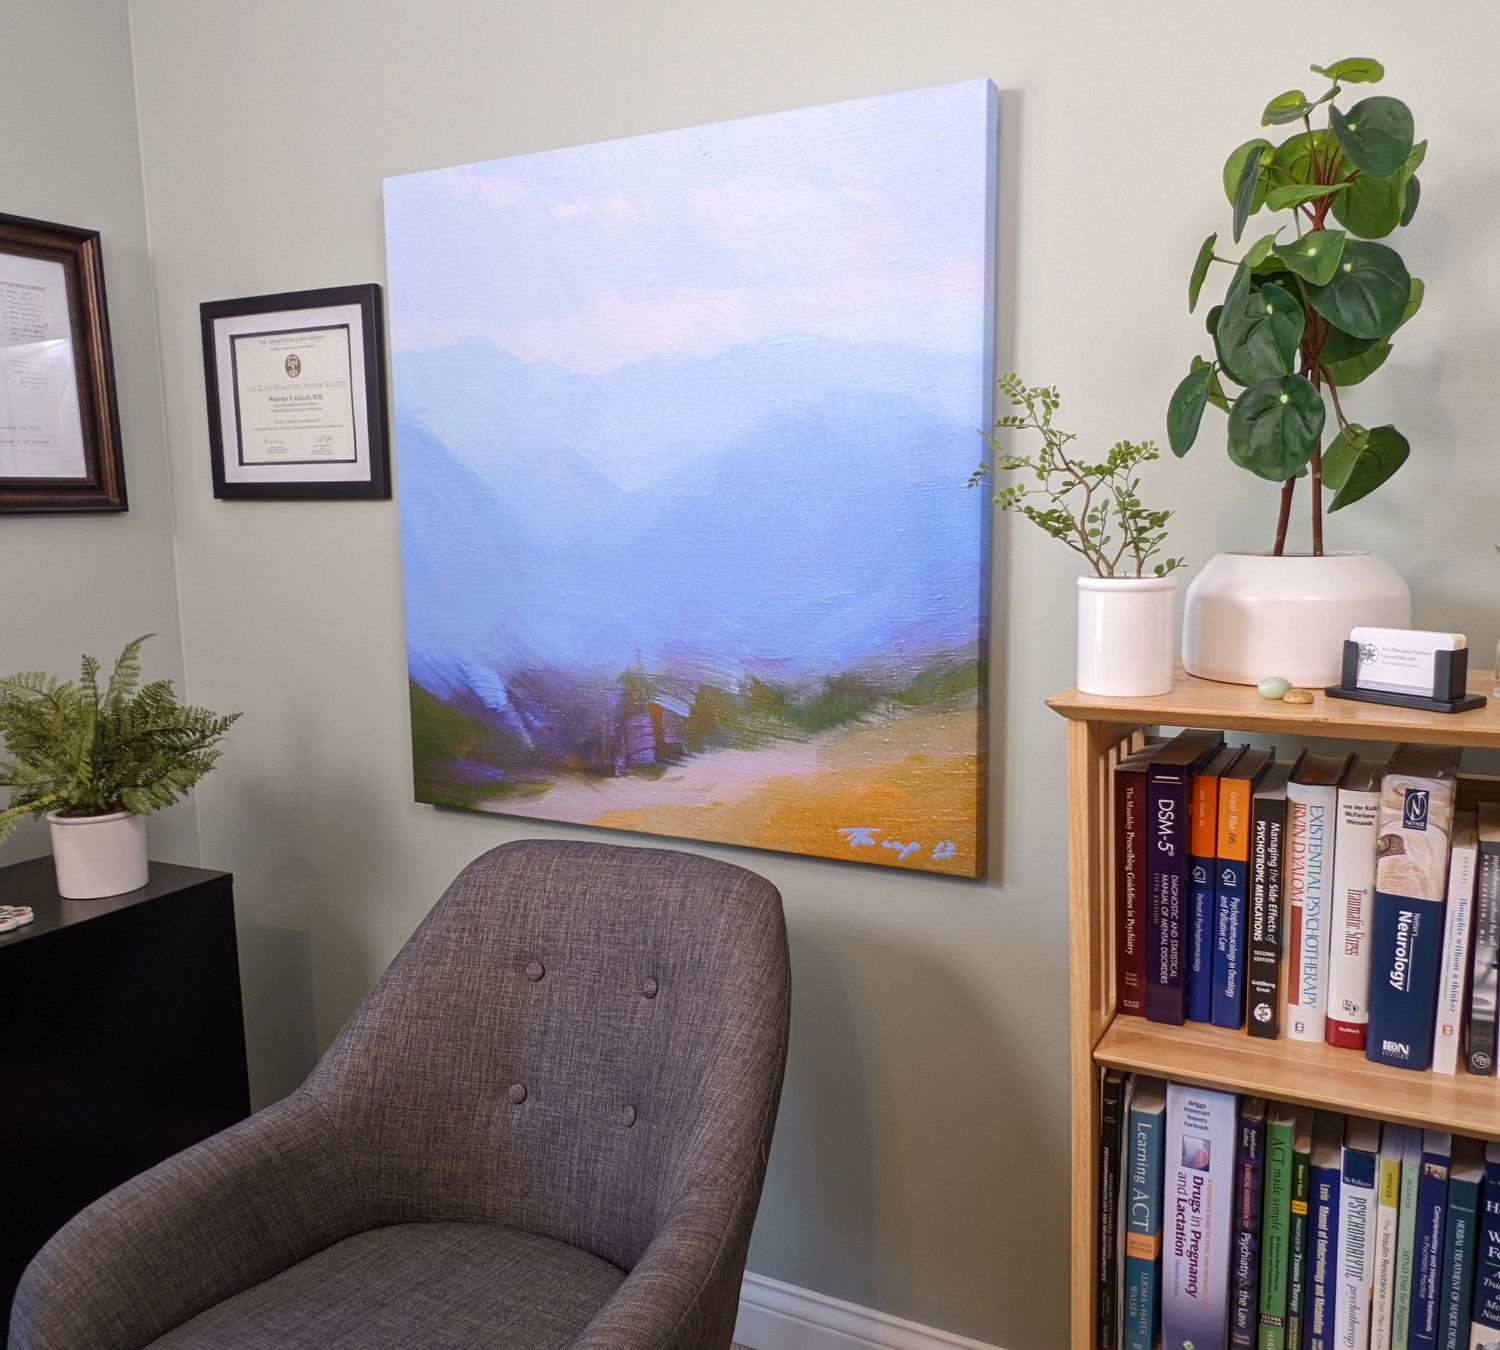 Gallery Photo of Psychiatrist Dr. Gilley's office. She works to make online visits feel as natural and possible.